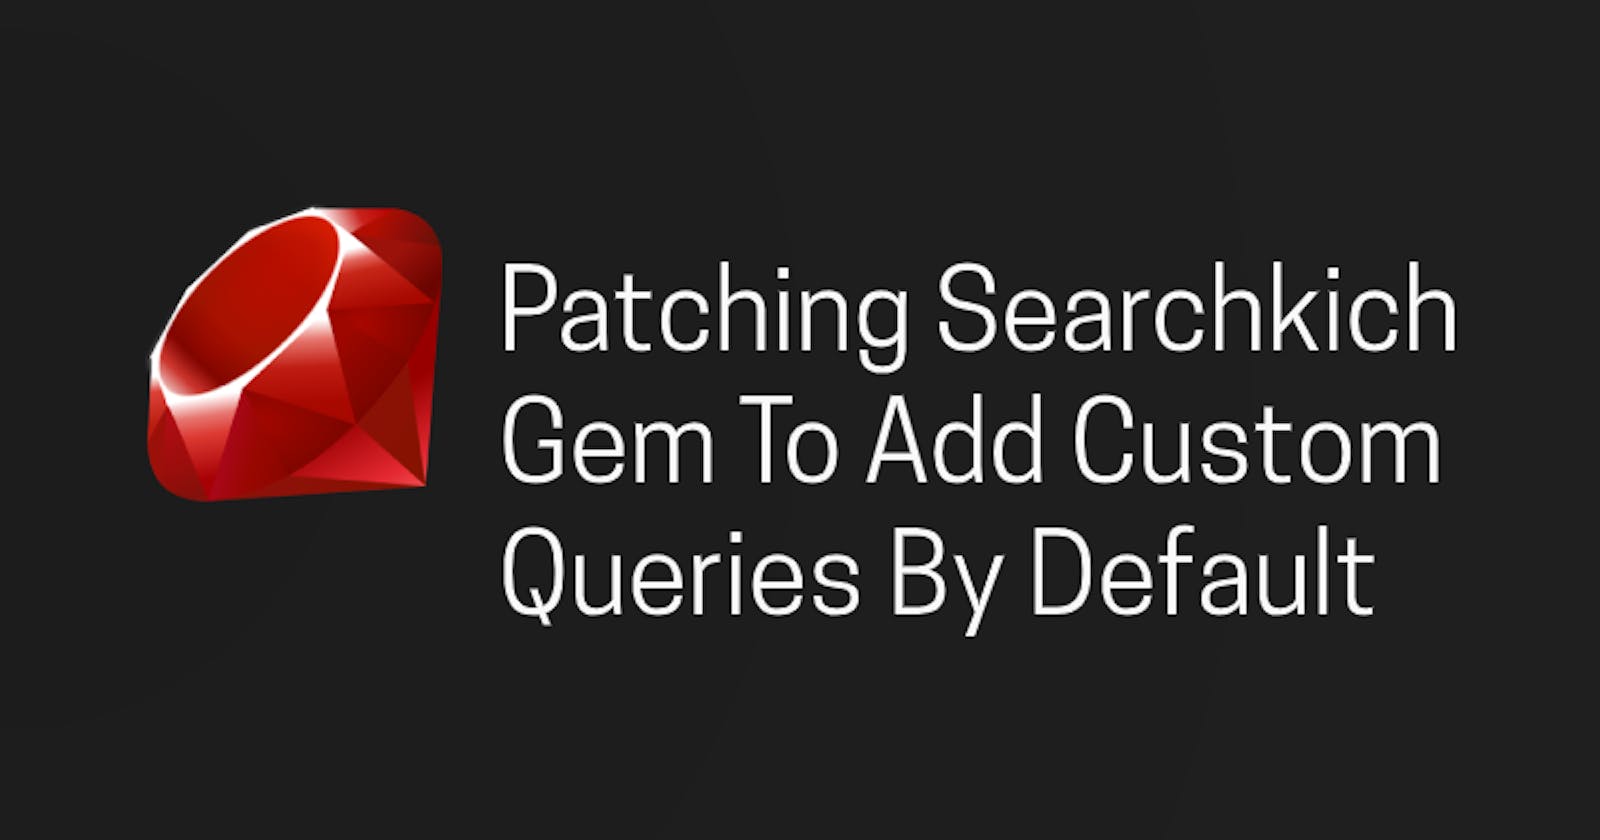 Patching Searchkich Gem To Add Custom Queries By Default